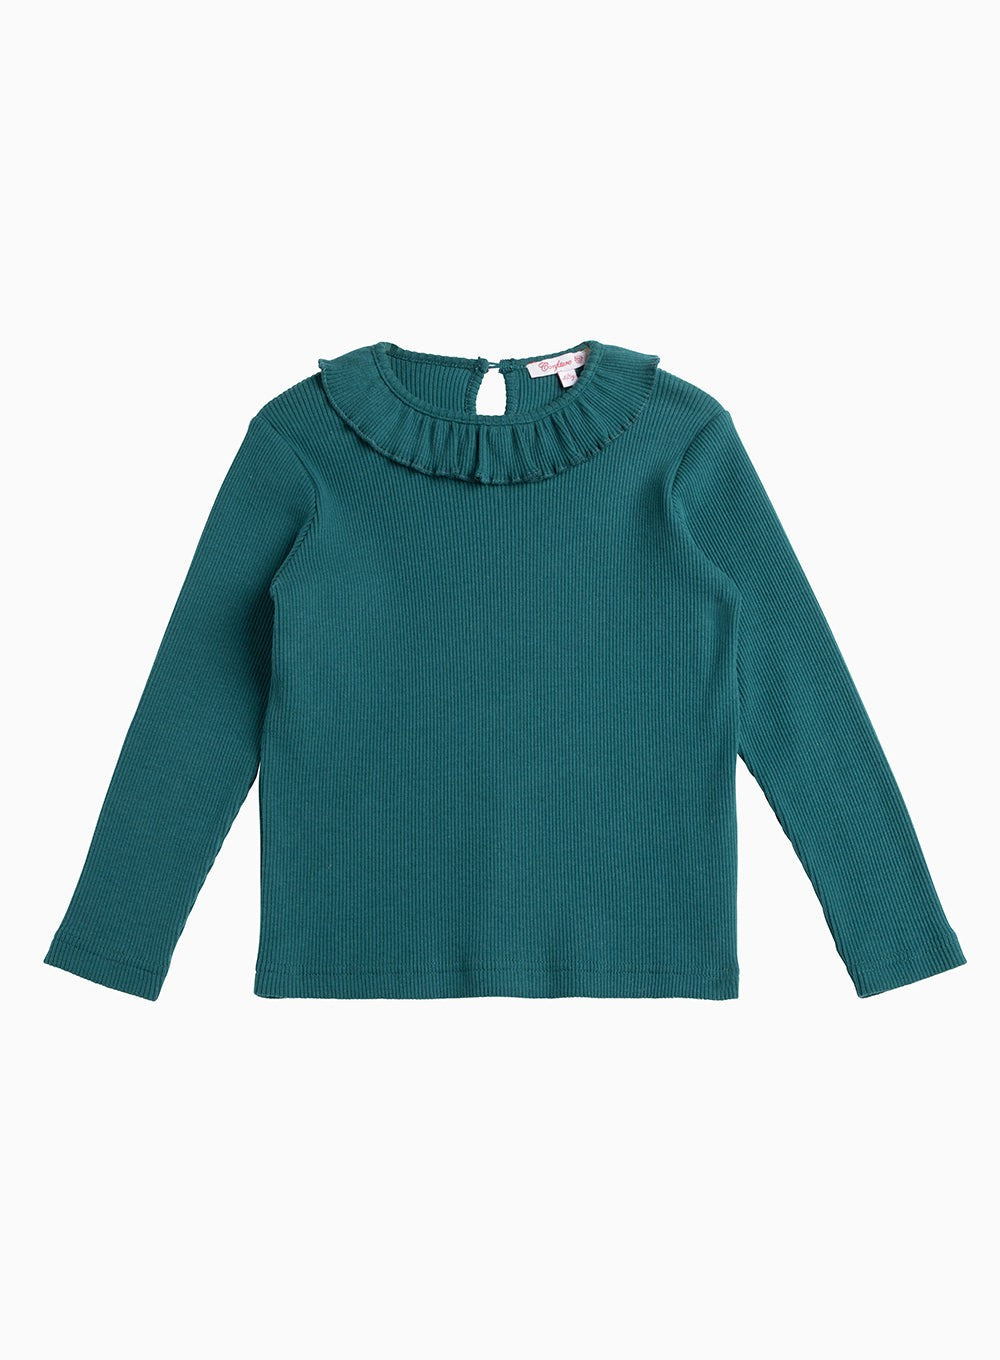 Confiture Top Grace Willow Jersey Top in Forest